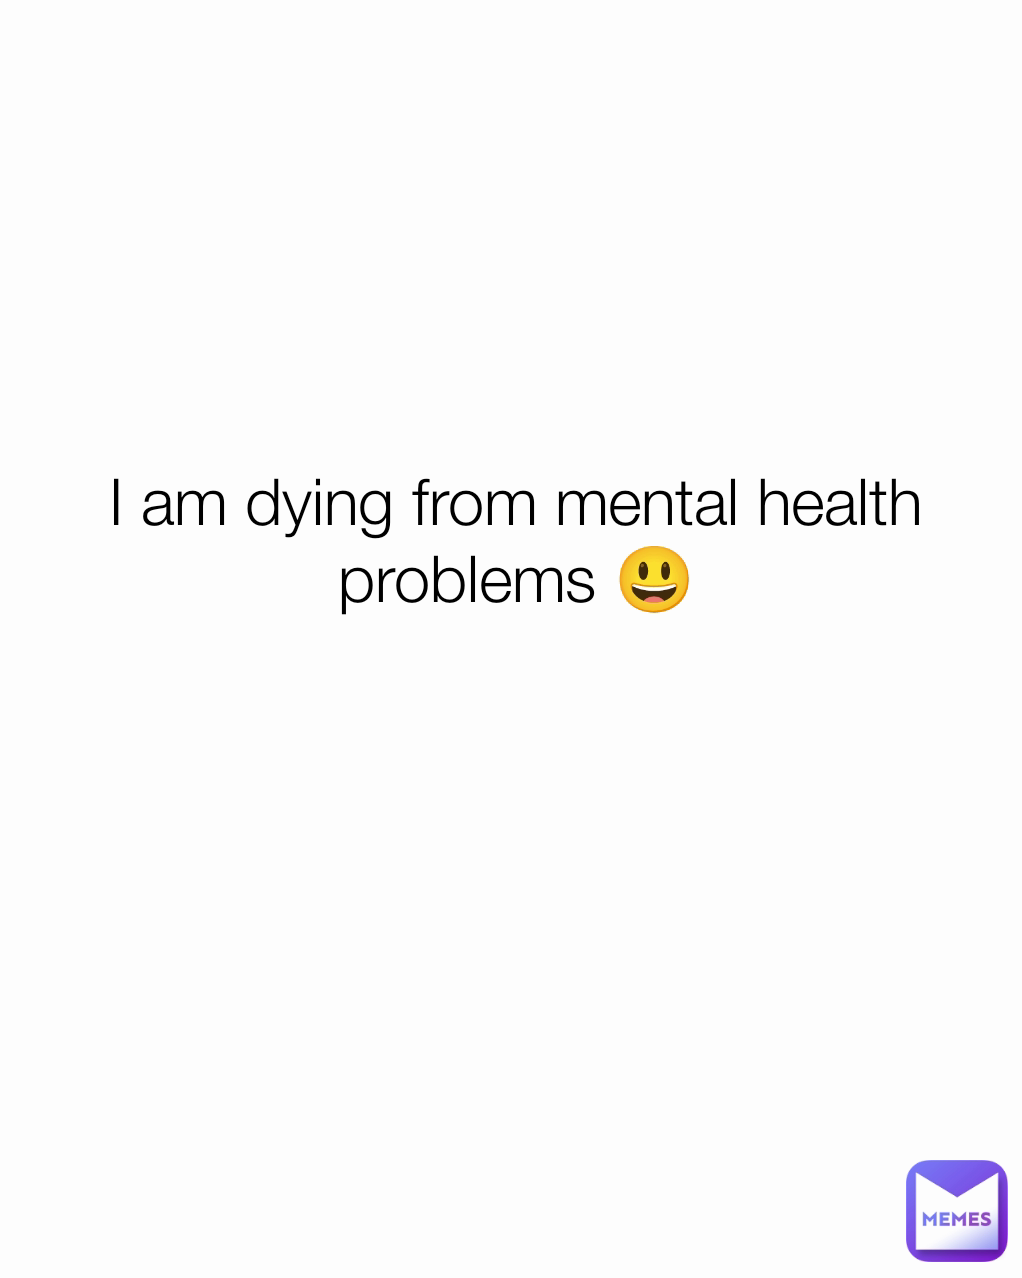 I am dying from mental health problems 😃